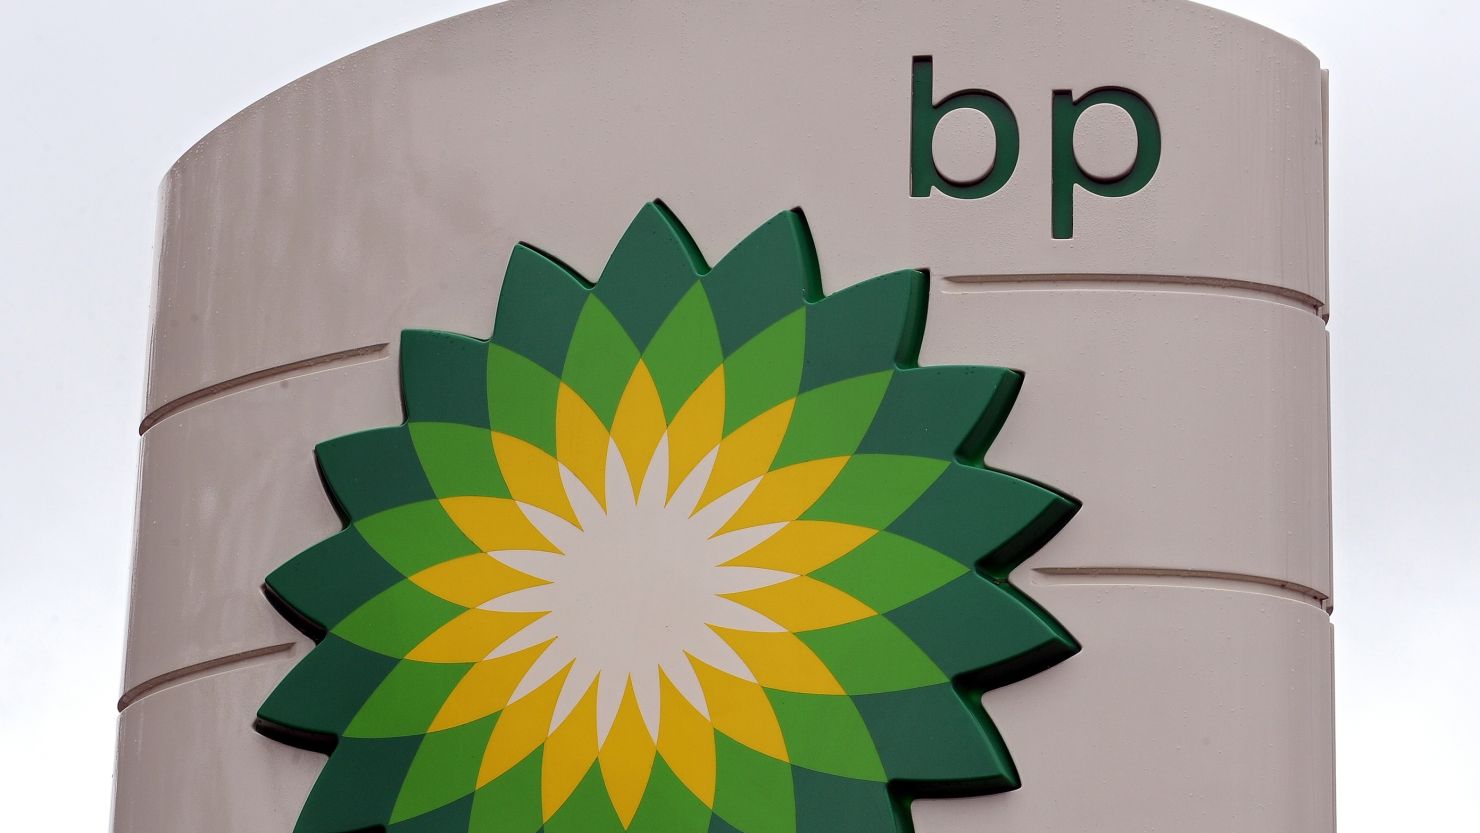 This week, MME looks at why BP has been excluded from the next round of oil concessions in the UAE.